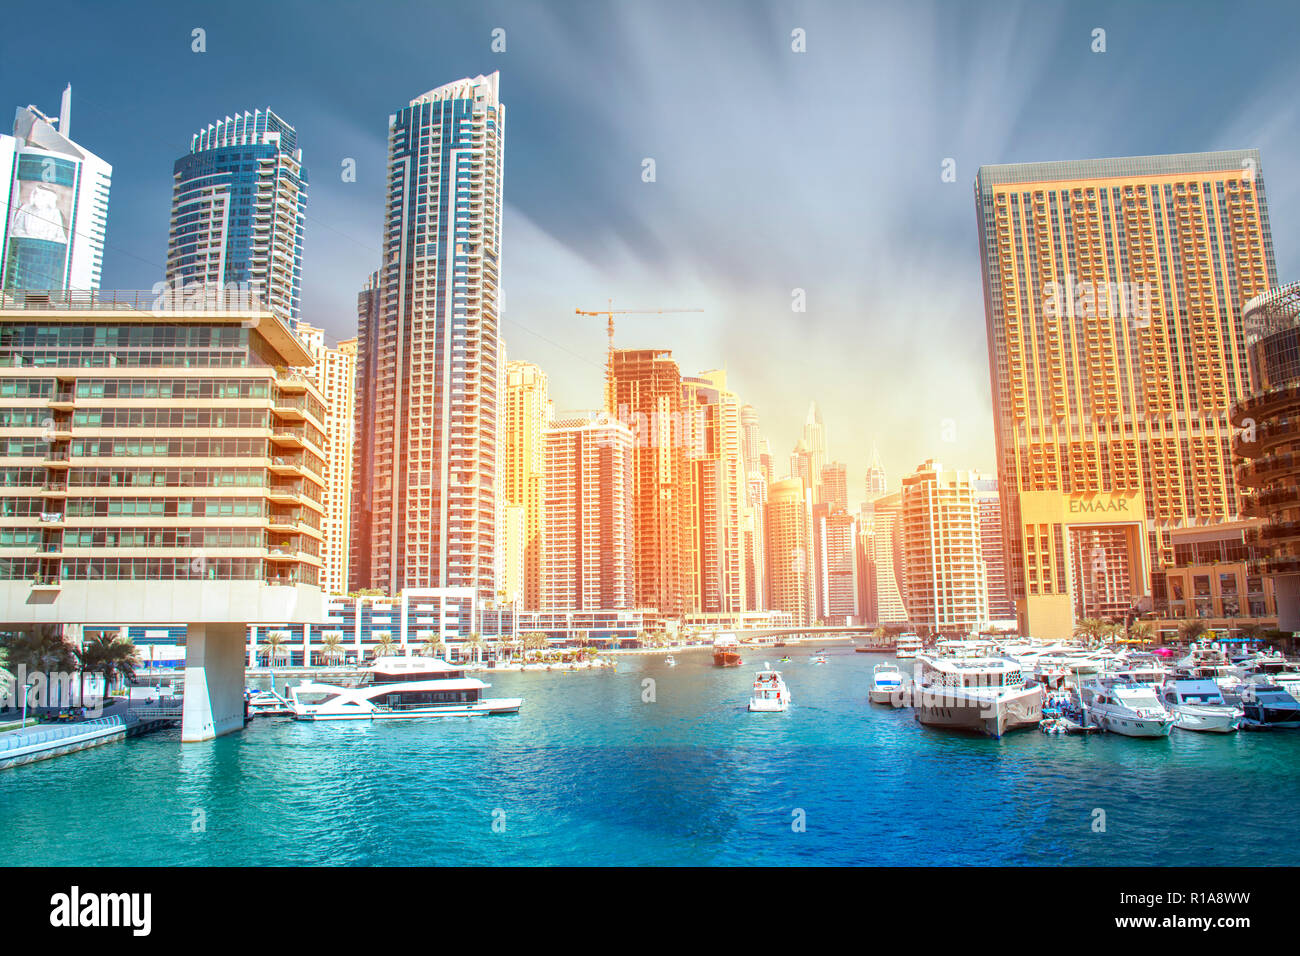 Beautiful View of Dubai Marina lake with luxury super .yacht and colorful buildings Stock Photo